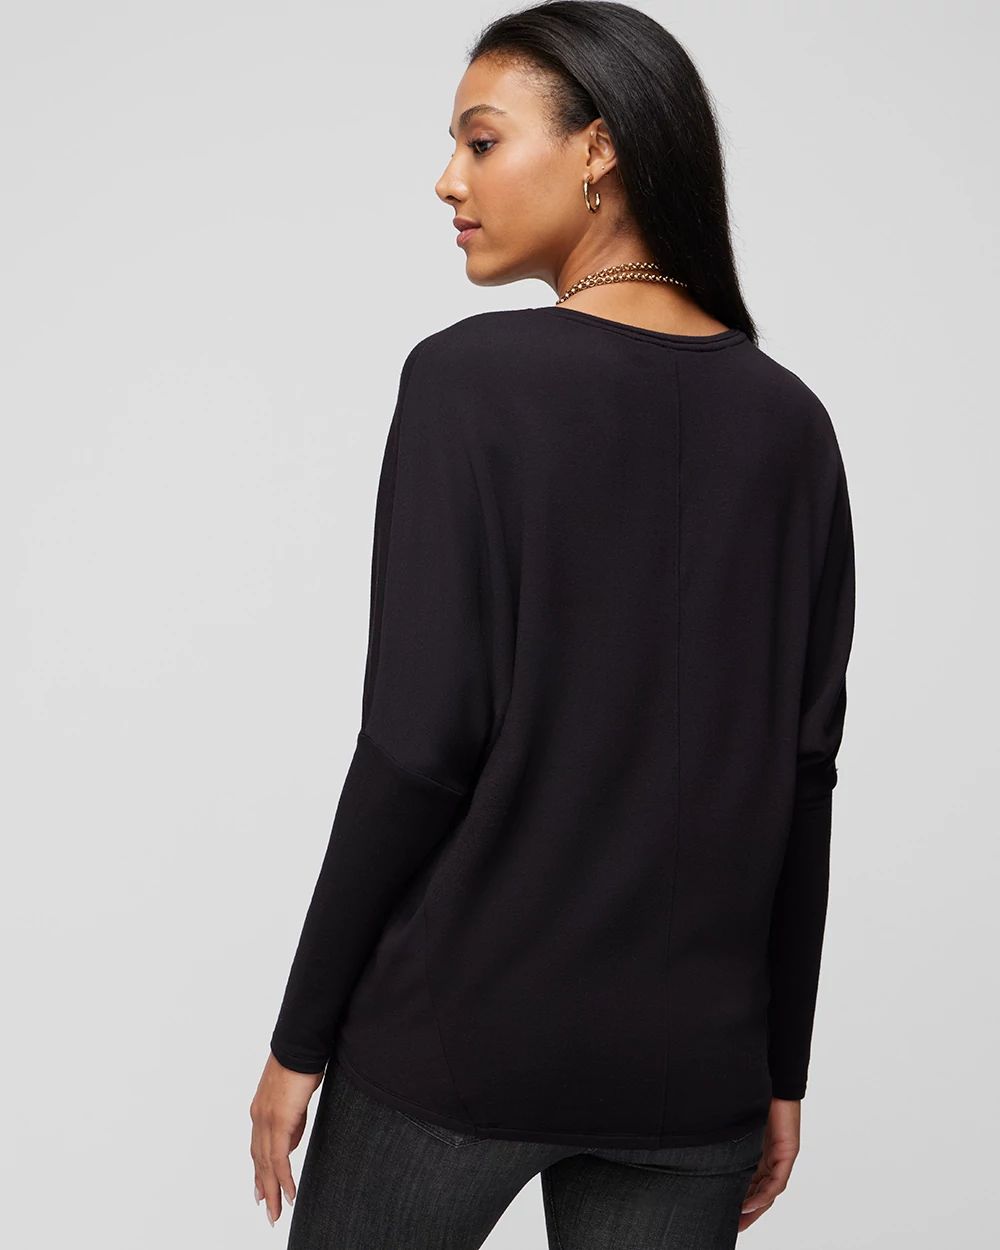 The Passporter   Dolman Tunic click to view larger image.